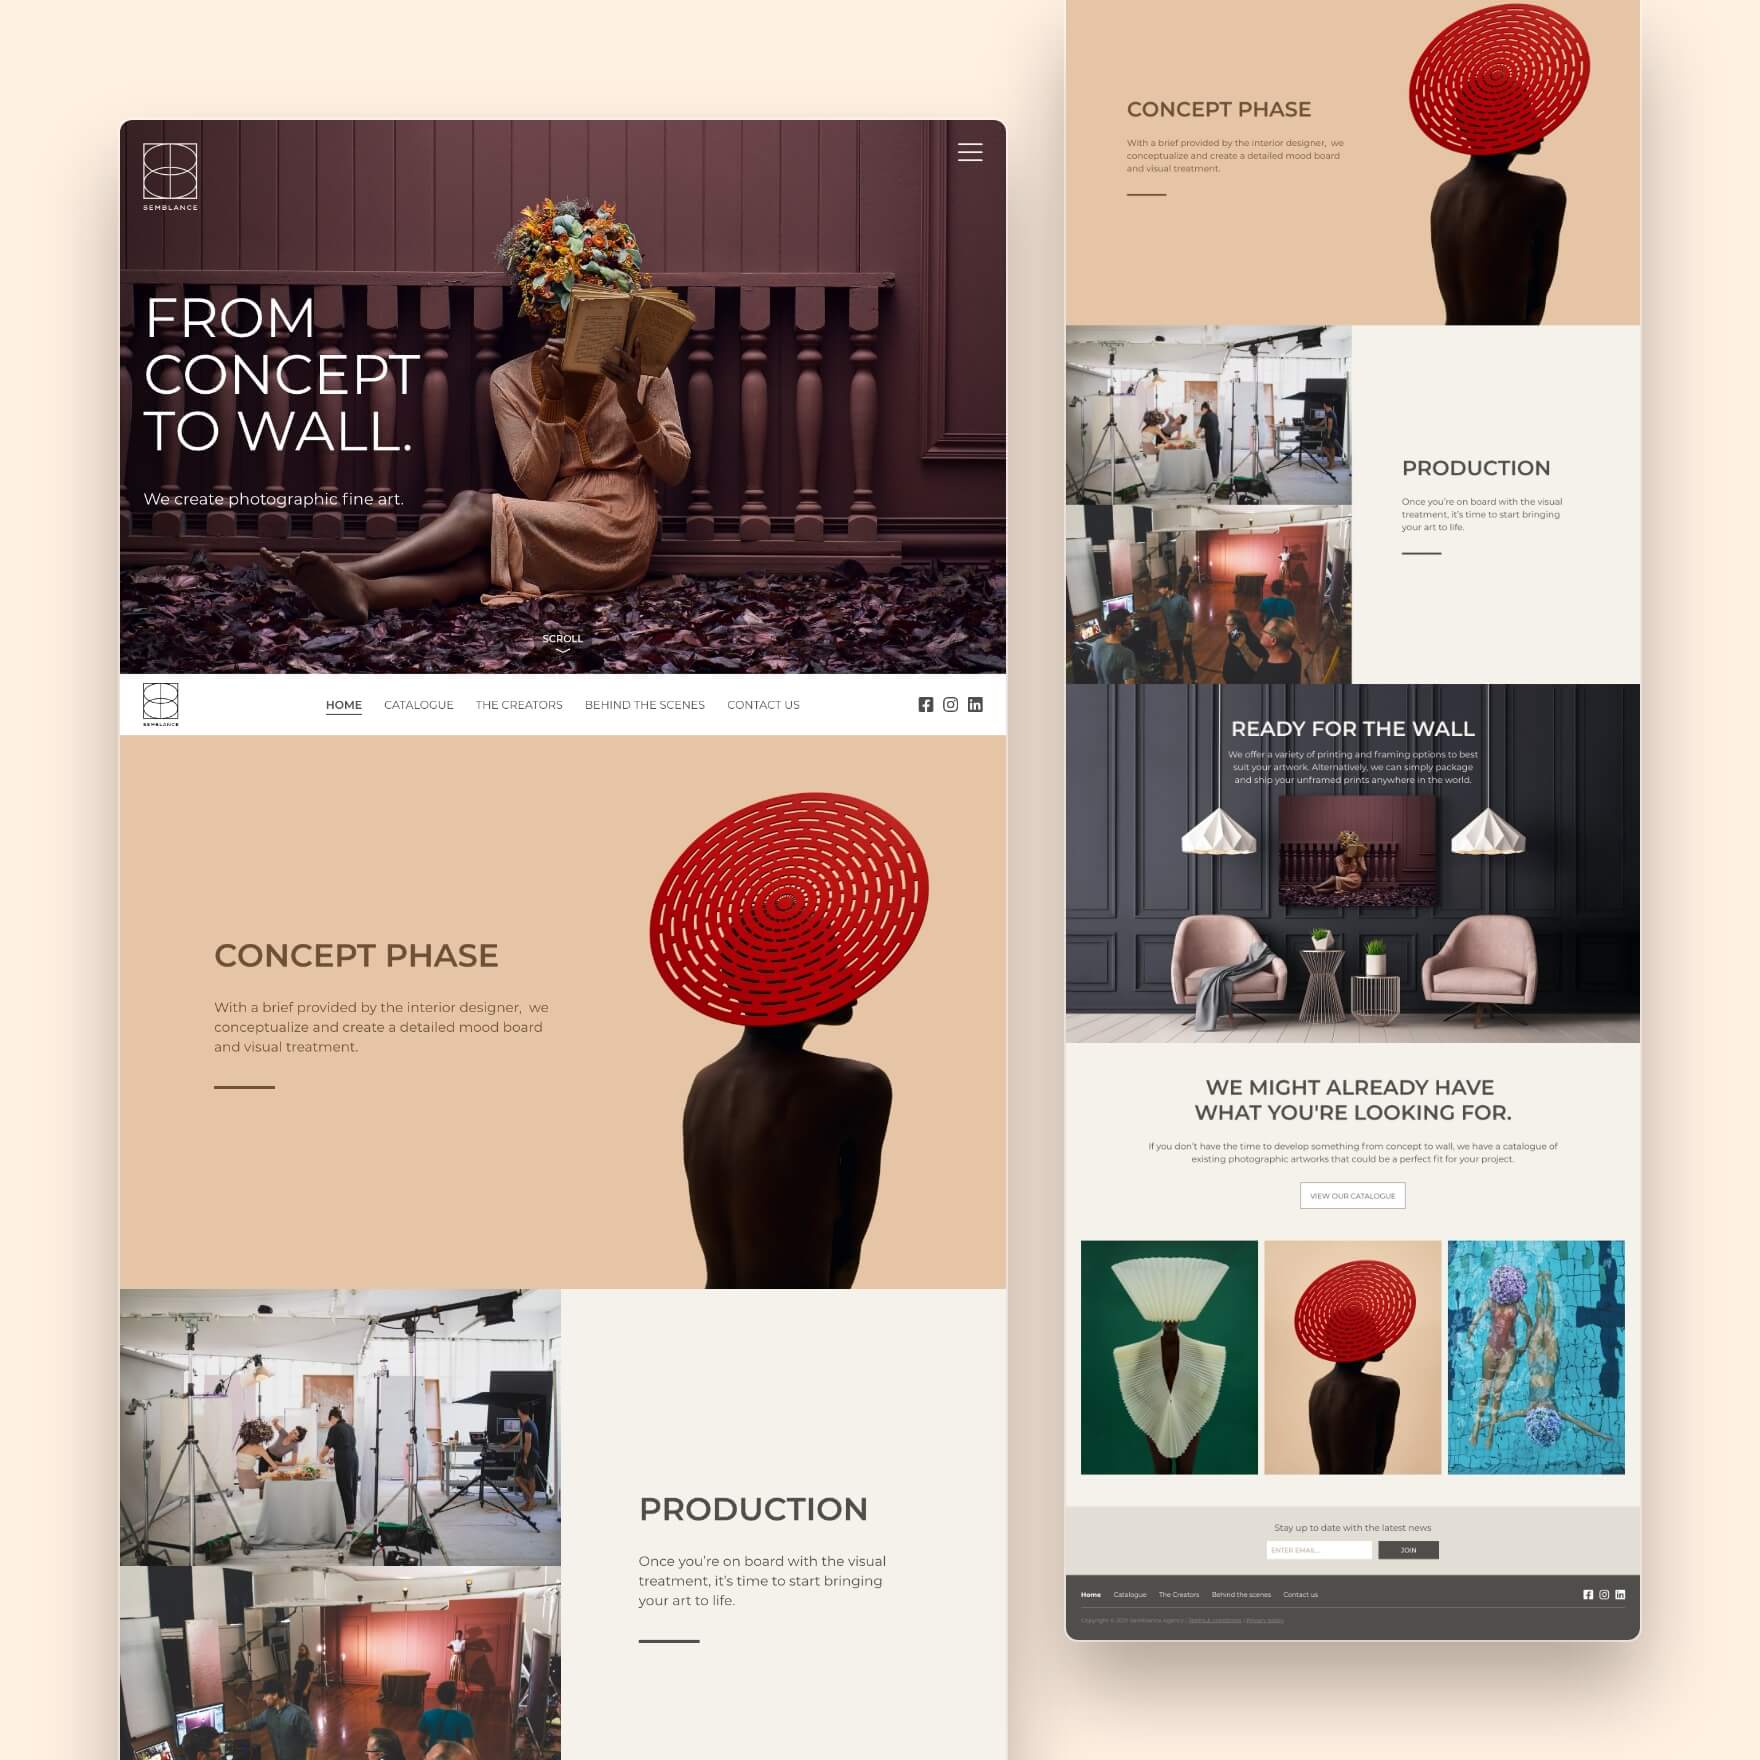 the homepage design of Semblance agency